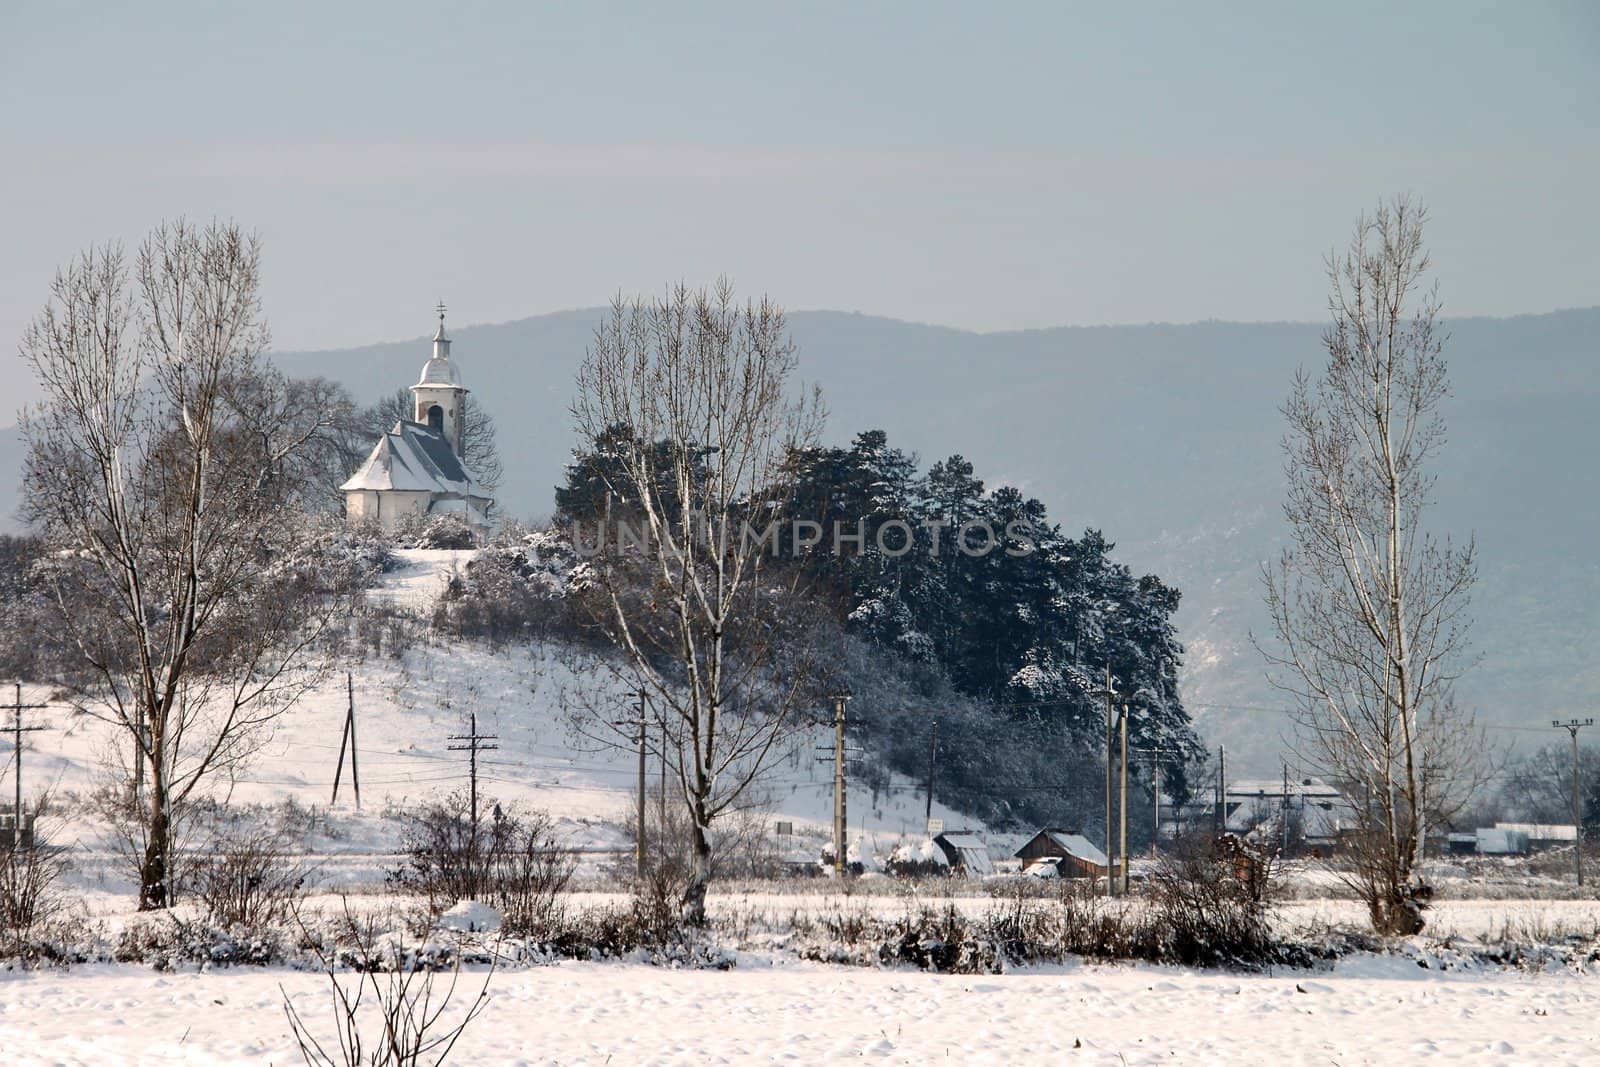 Winter landscape with trees and a church